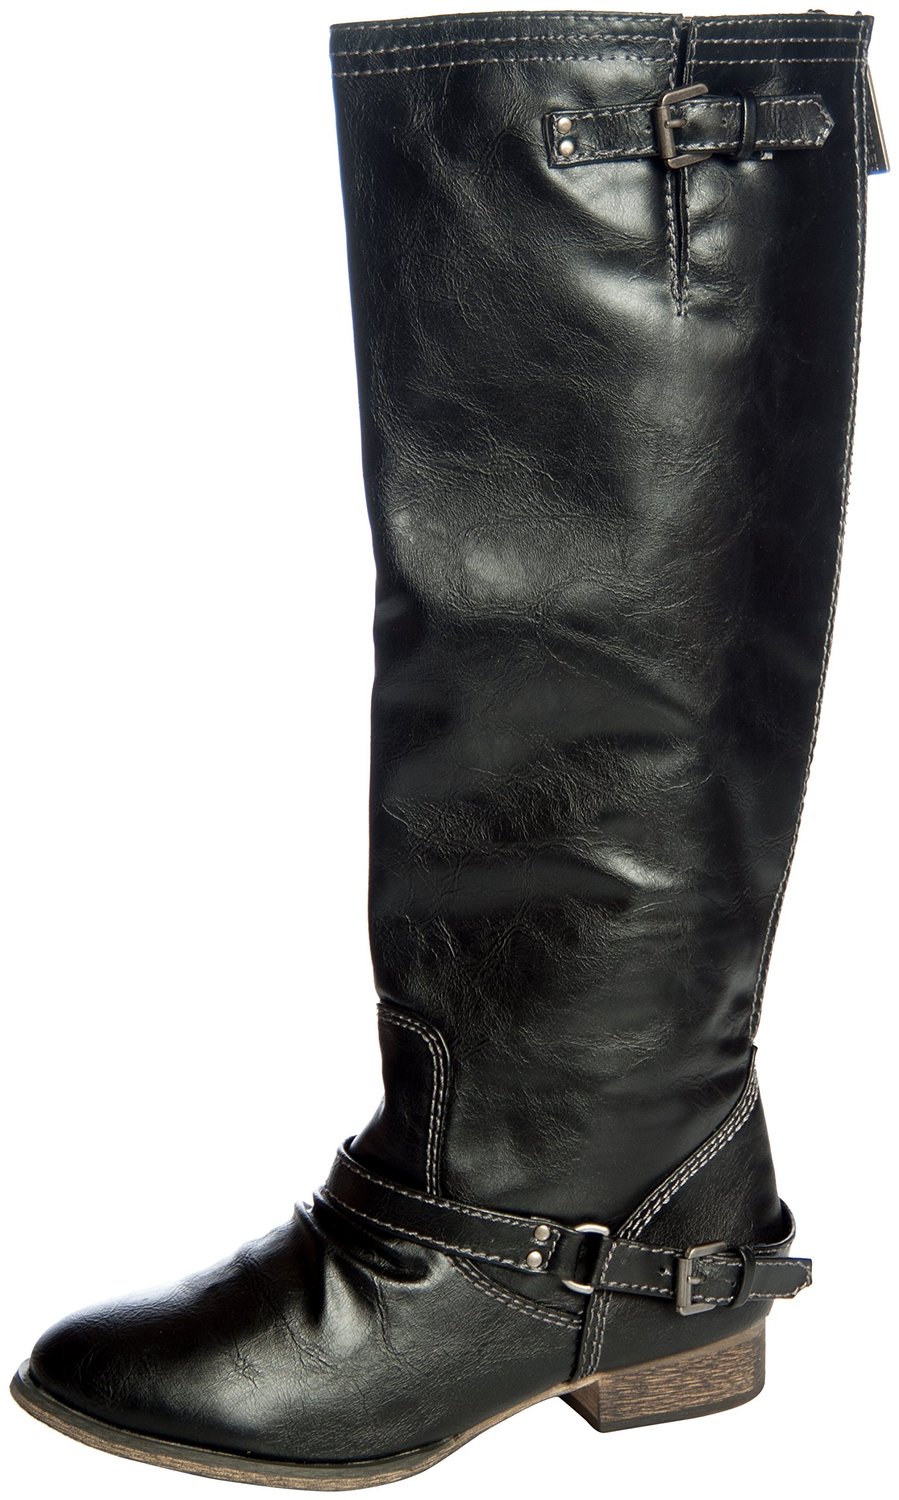 Breckelles Women's Outlaw-81 Knee High Boot